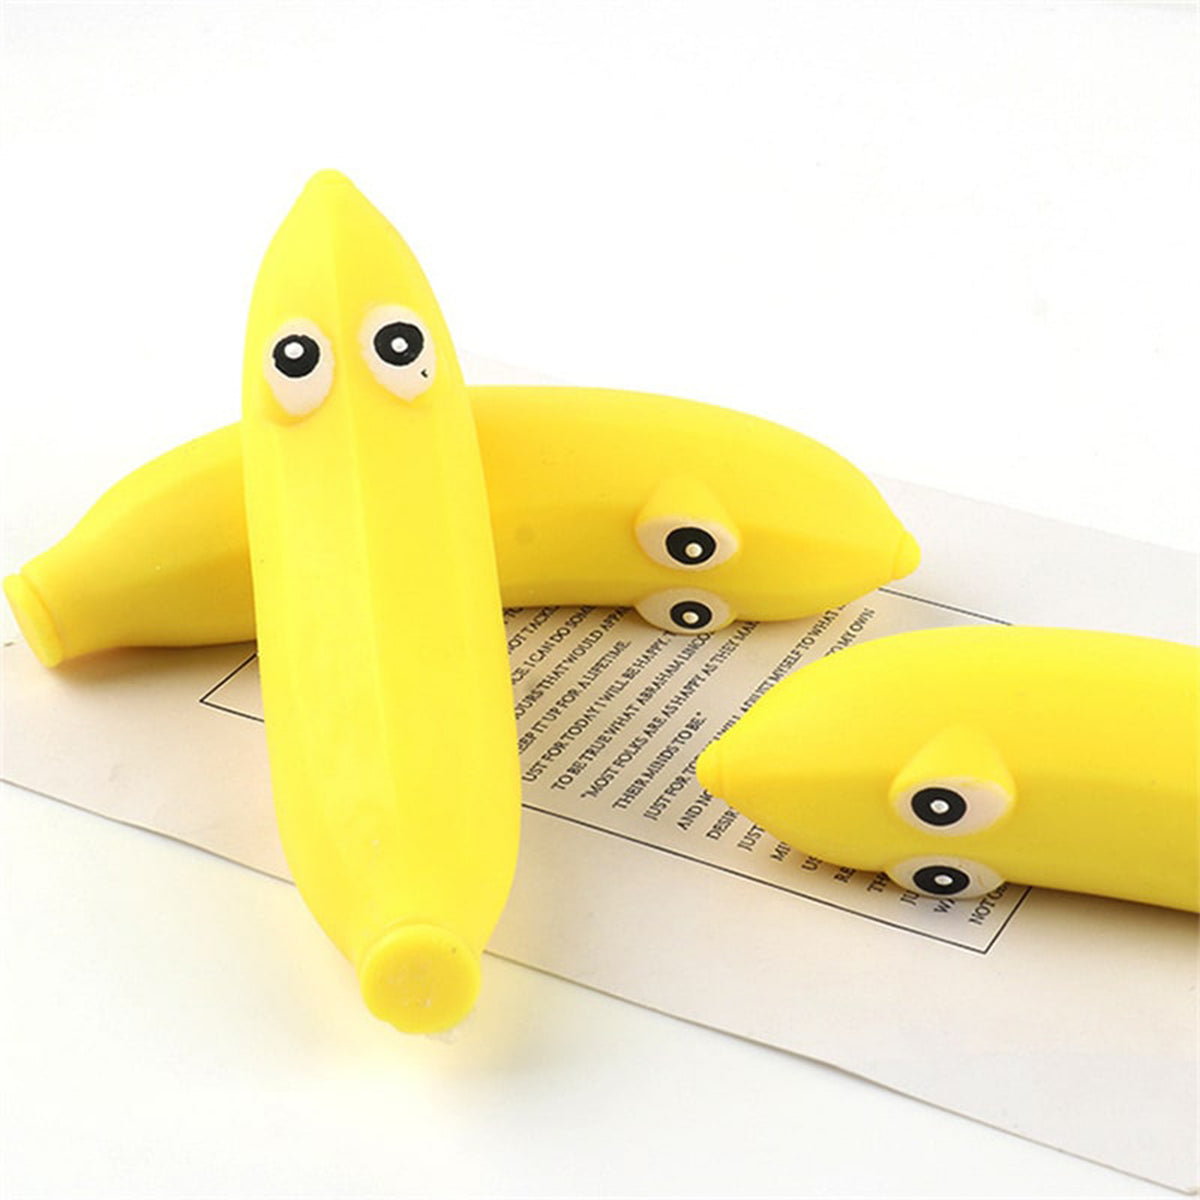 Add a Fun Twist to Your Fidget Collection with the Yellow Banana Sand Filled Fidget Toy